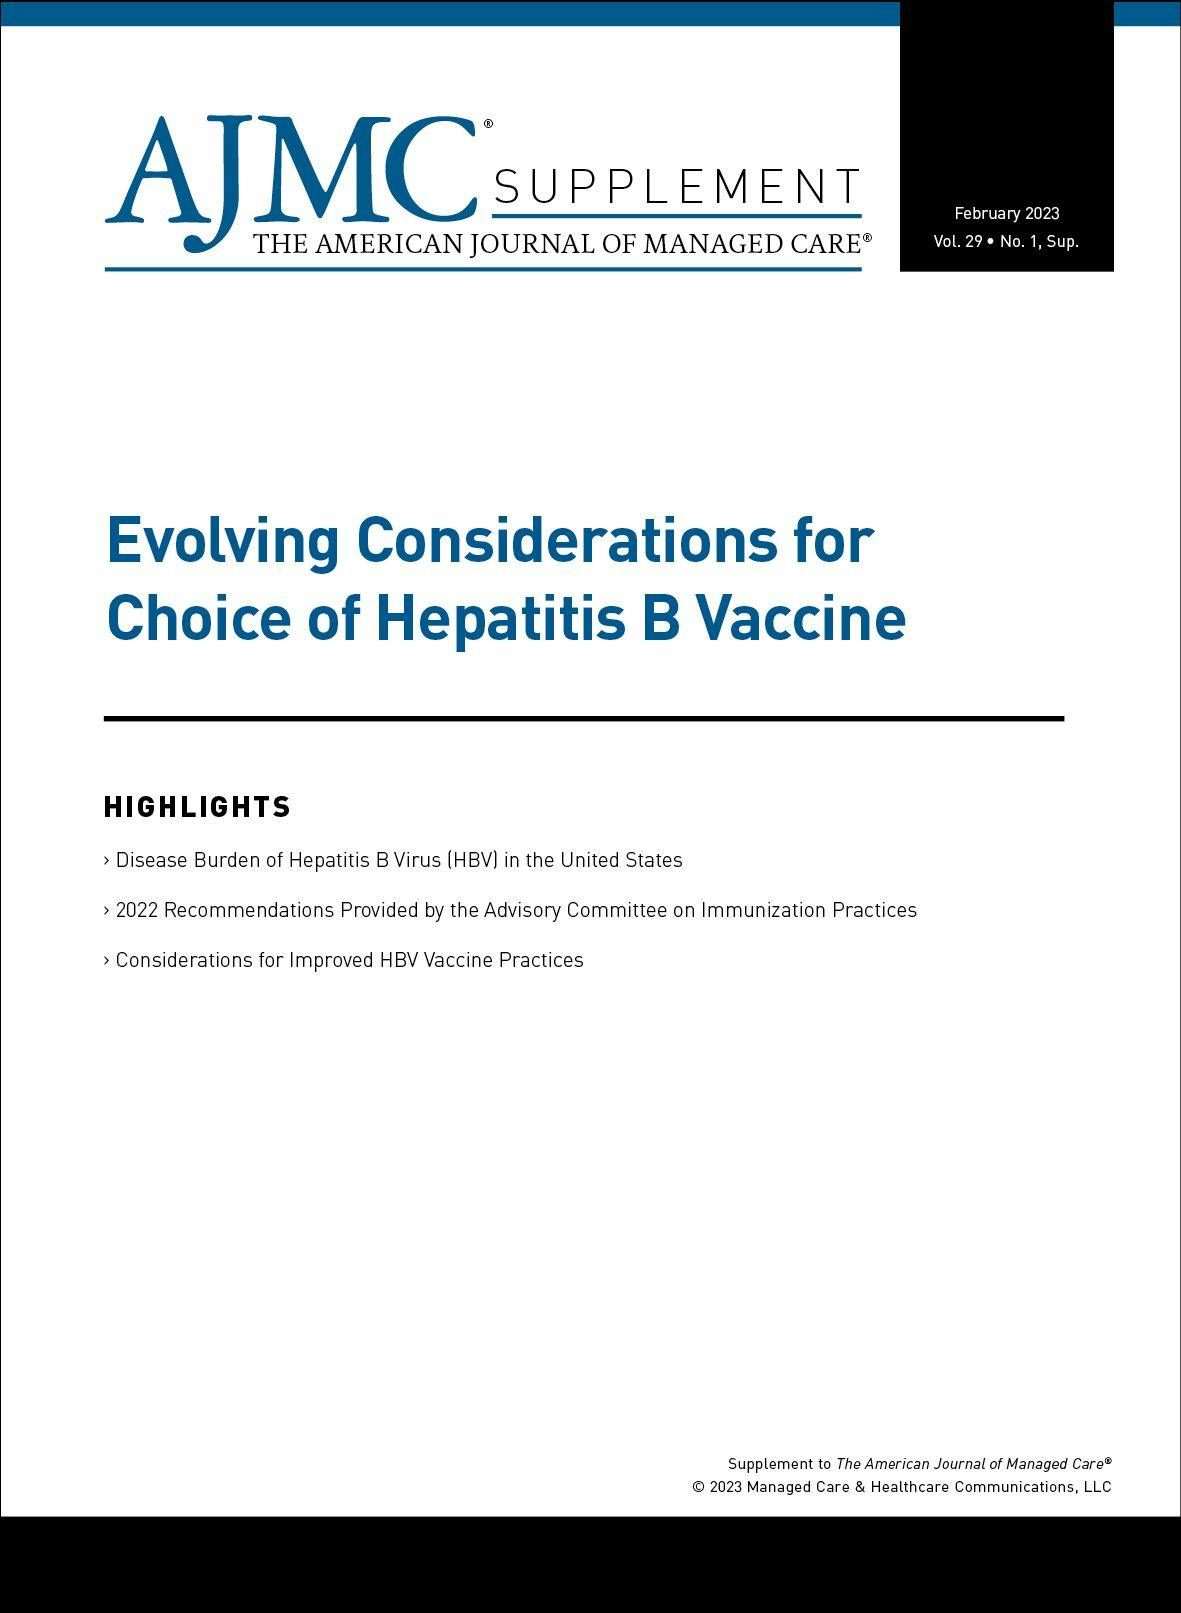 Evolving Considerations for Choice of Hepatitis B Vaccine